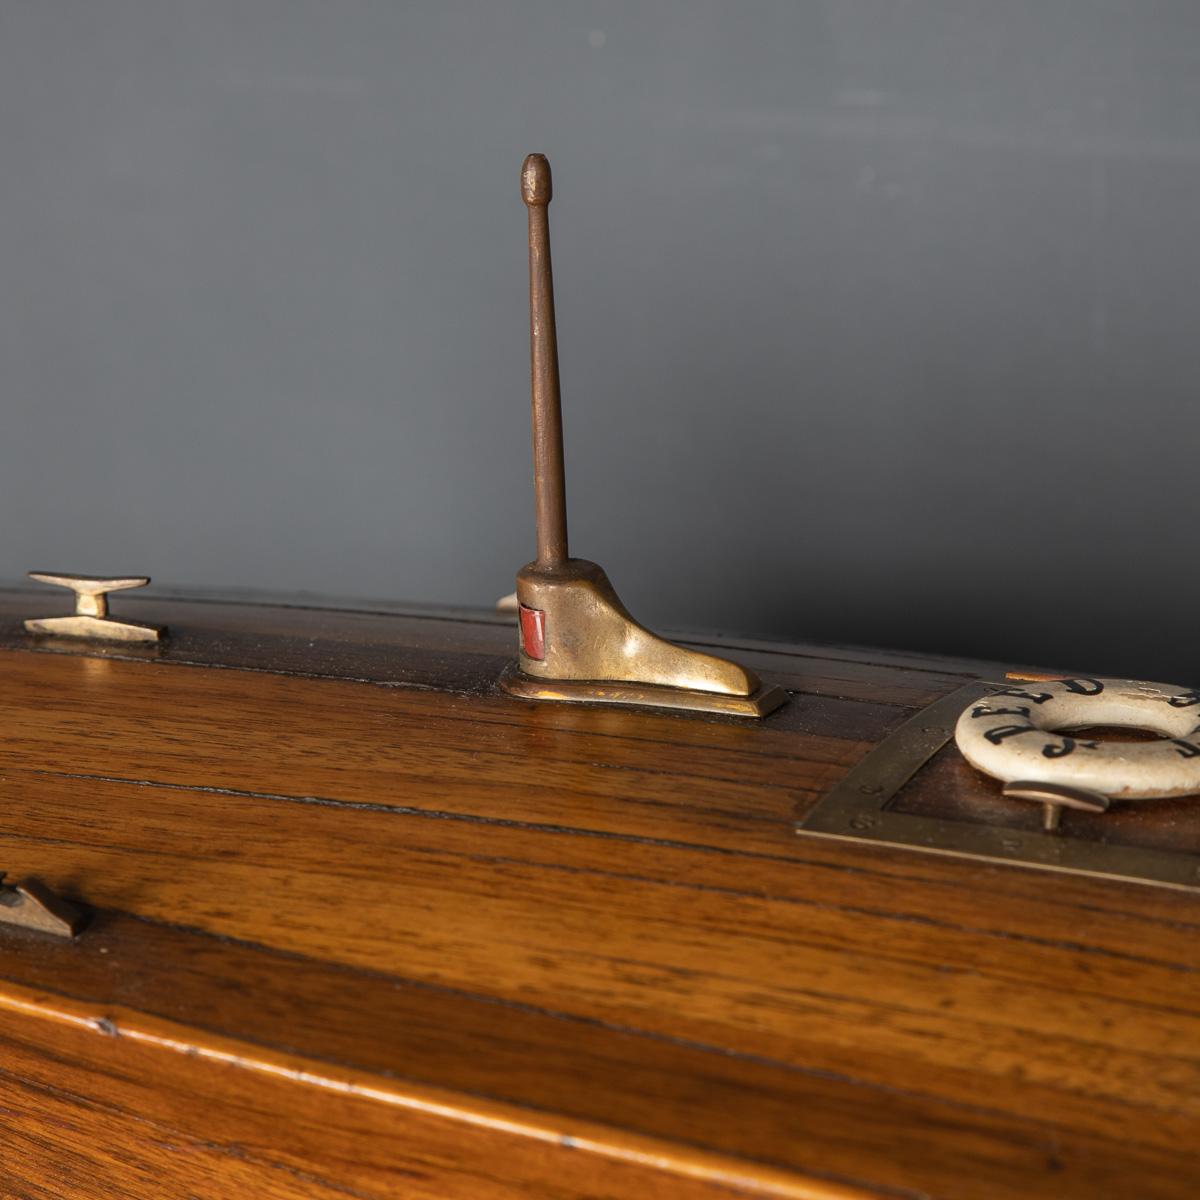 American 20th Century Mahogany & Rosewood Speed Boat Made in the State Prison, c.1930 For Sale